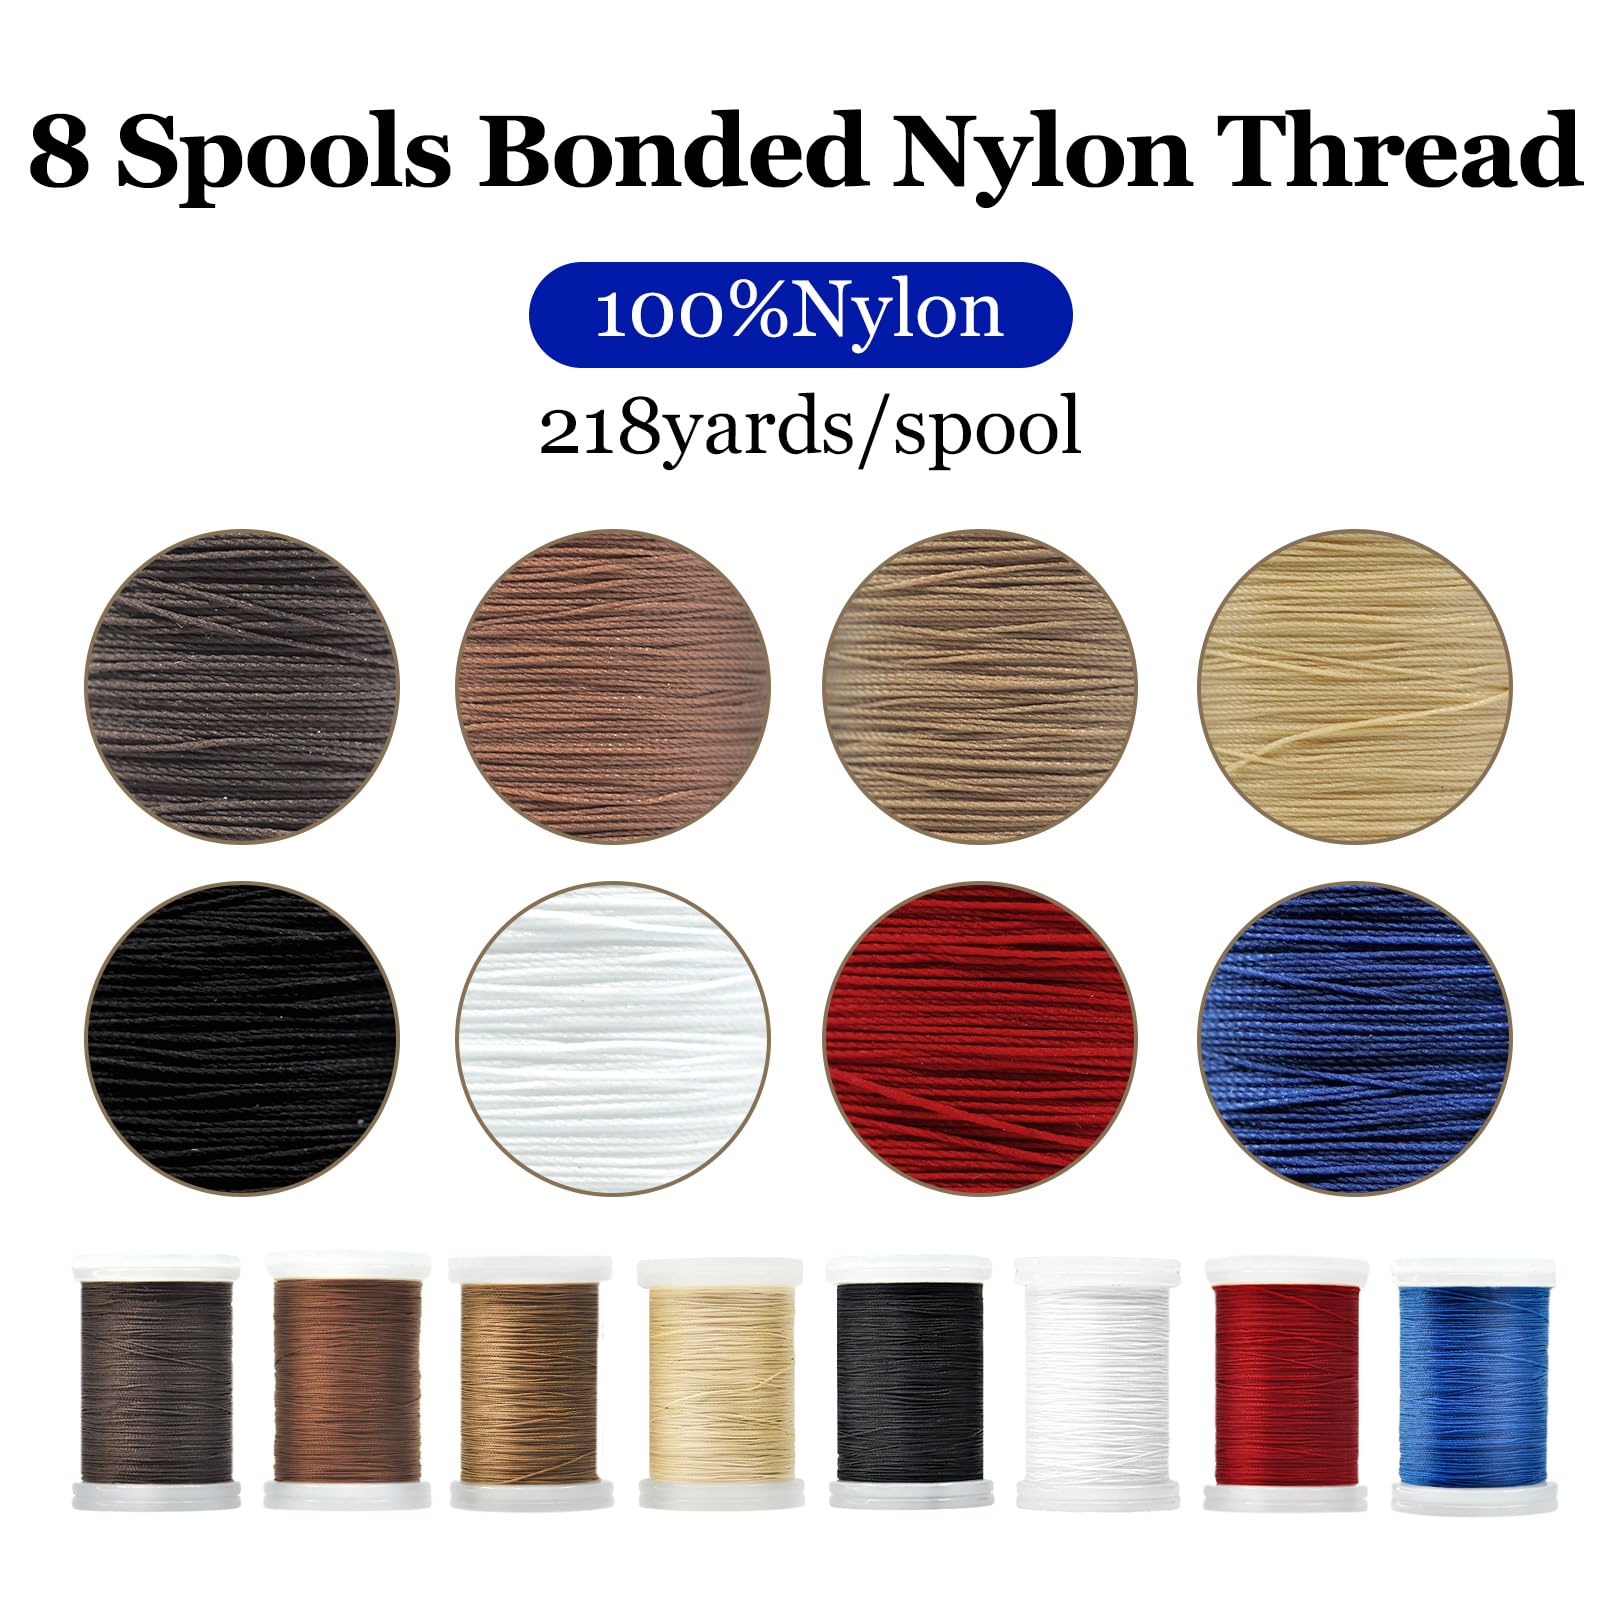 Bonded Nylon Thread for Sewing 8 Colors